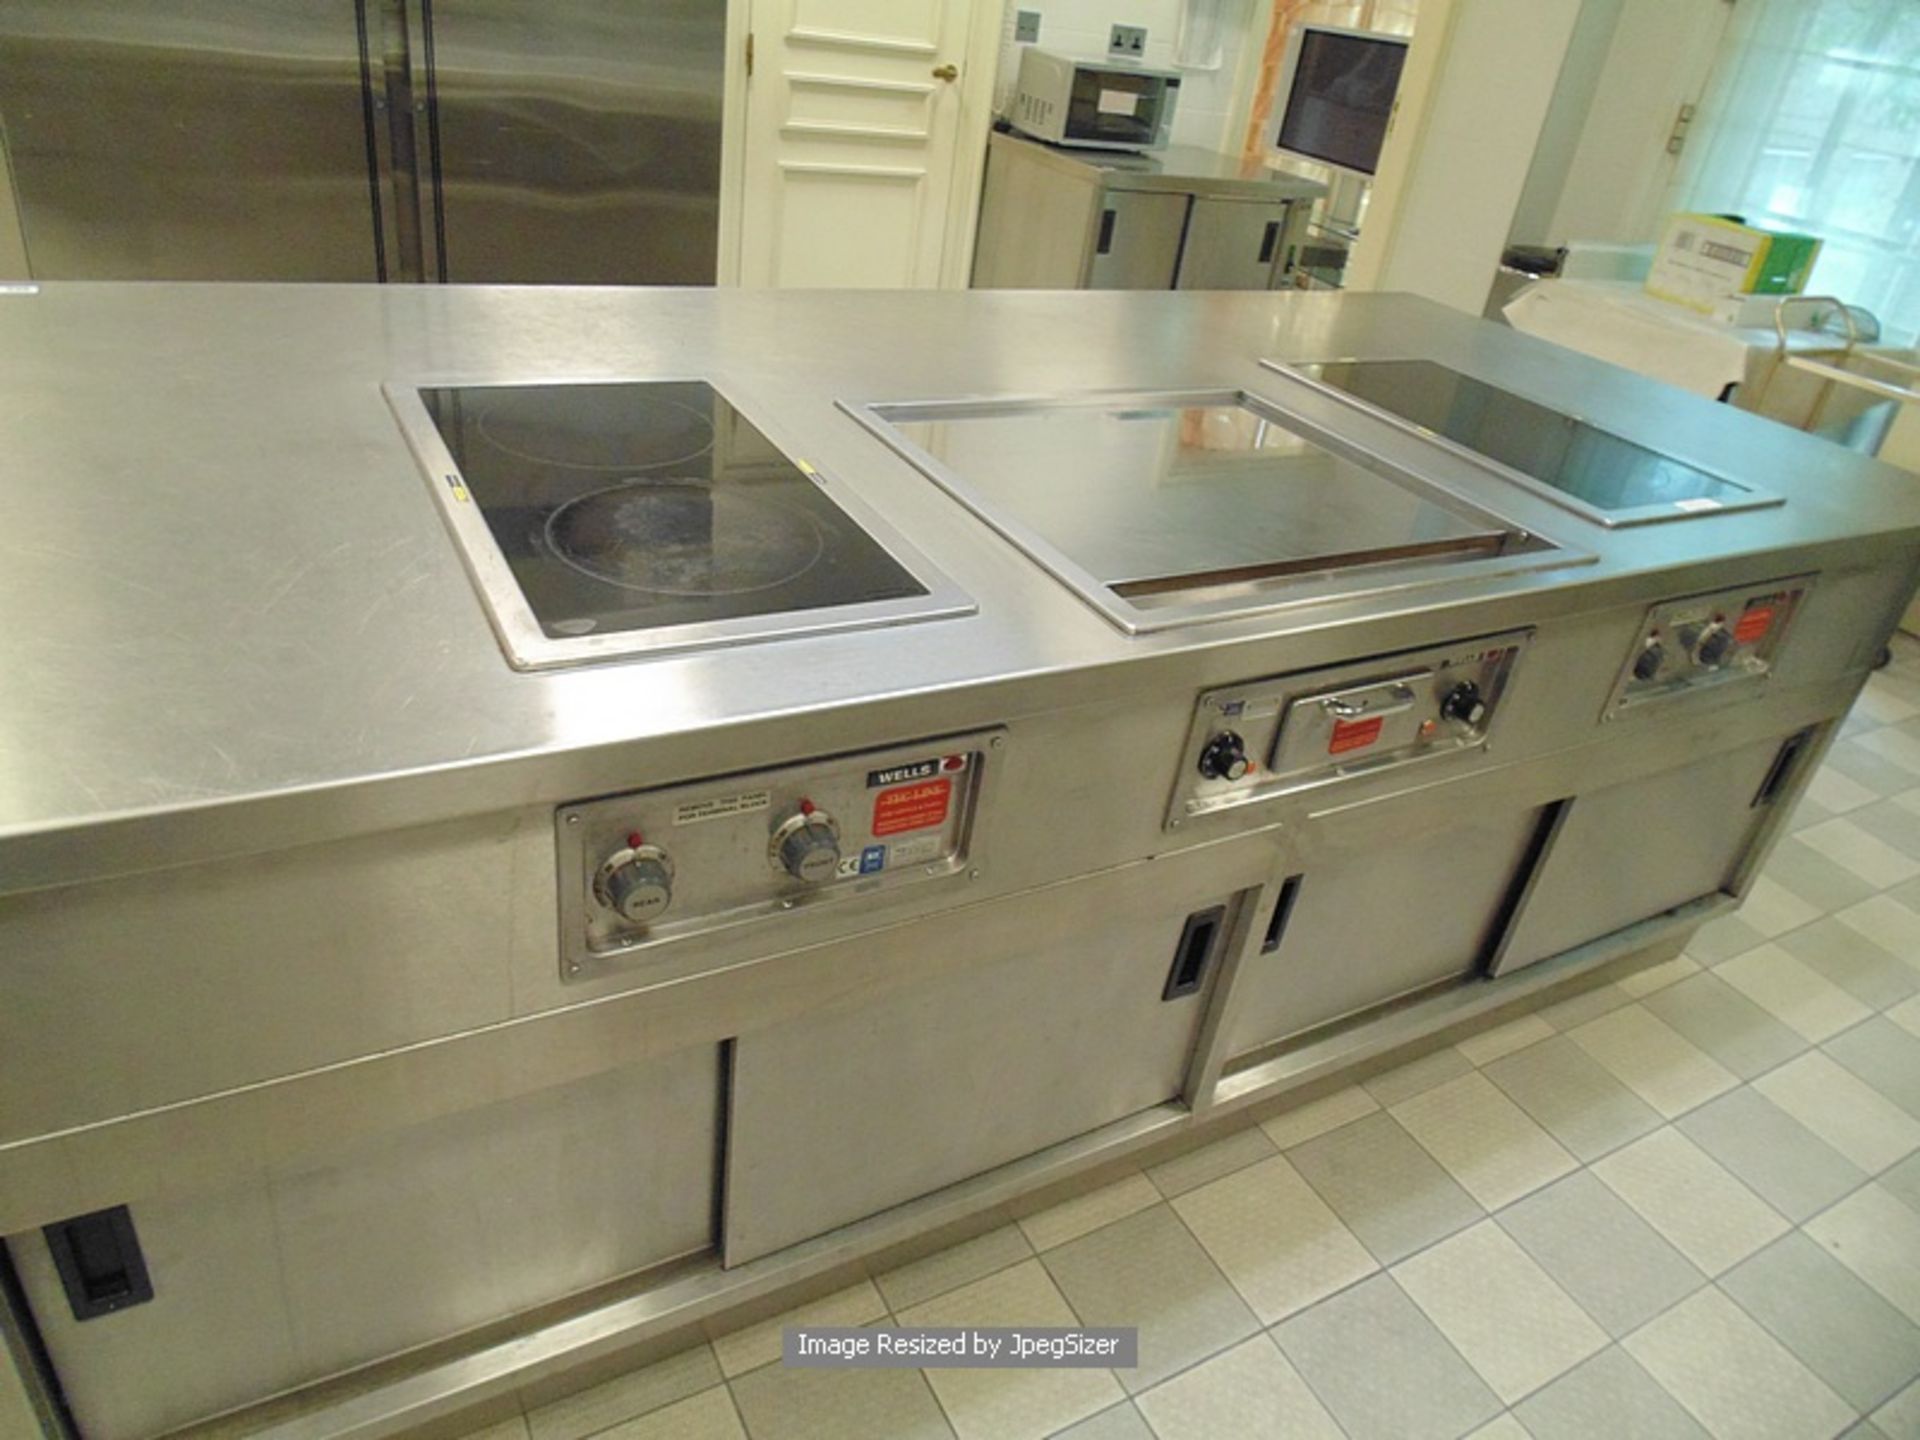 Stainless steel centre Island comprising of 2 x Wells Bloomfield HC2256EU built-in ceramic hotplates